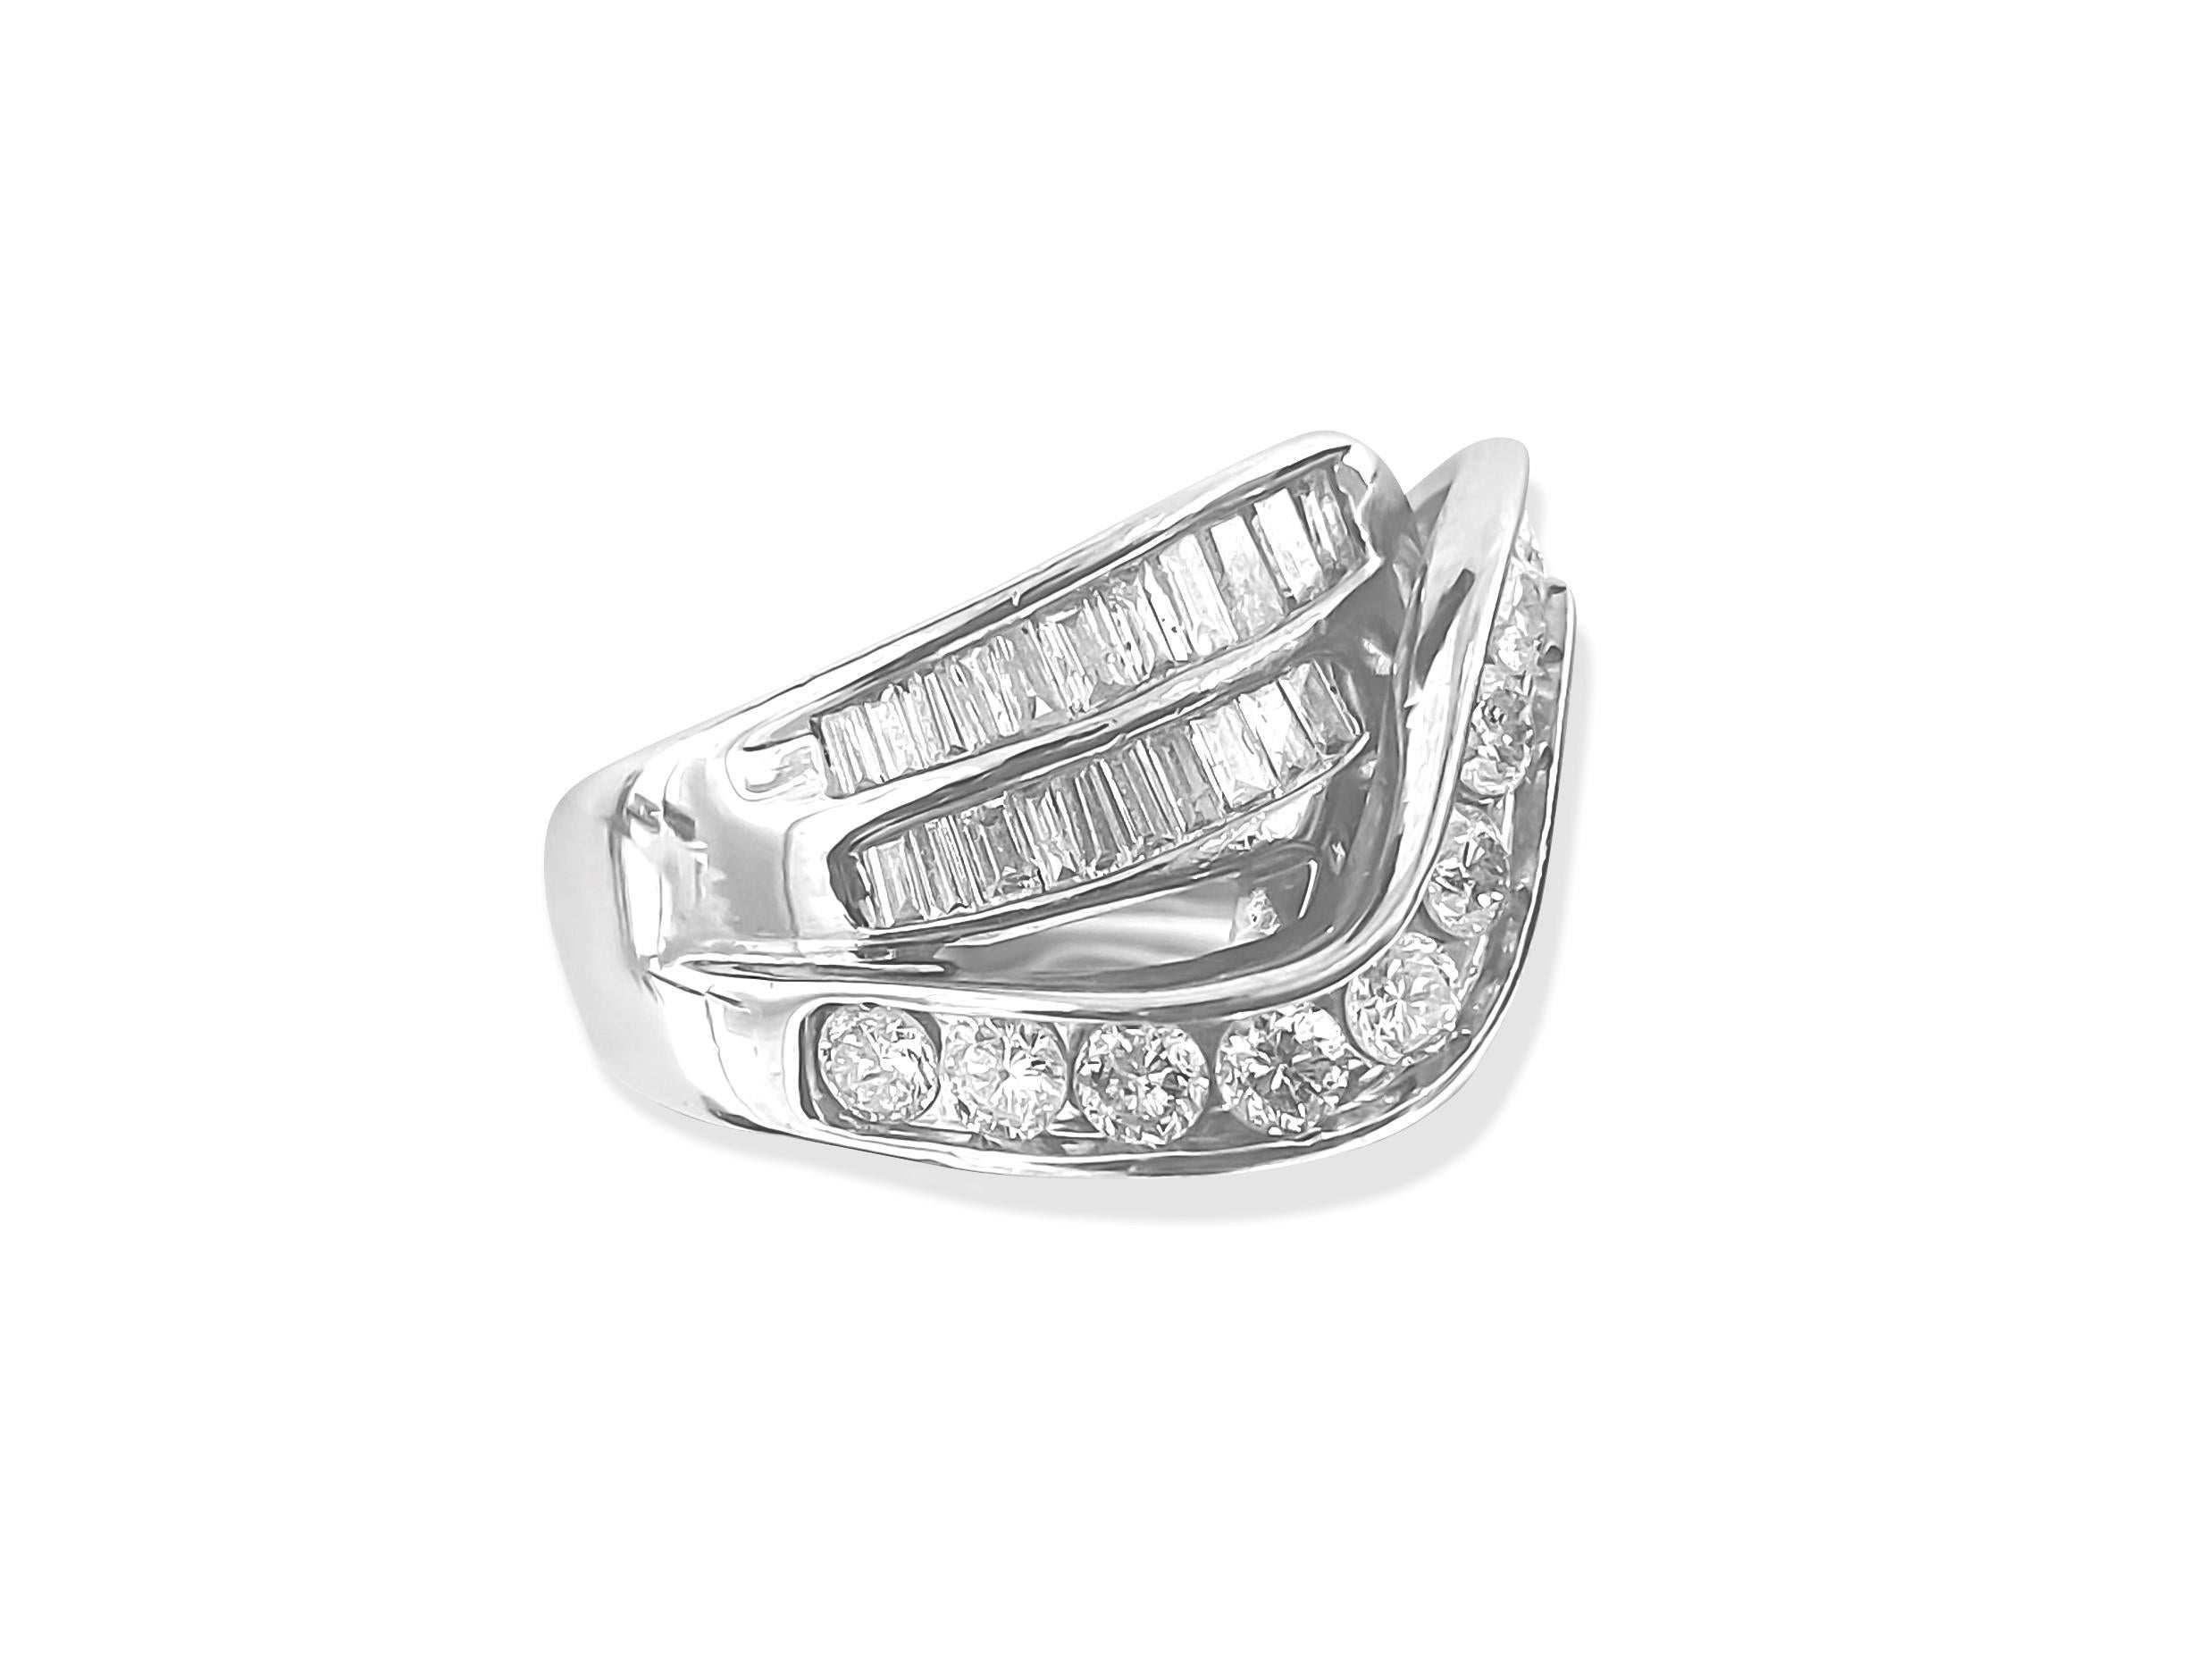 Metal: 14K White Gold. 
3.00 carat diamonds total.
VS-SI clarity and F-G color. Round and baguette cut. 100% natural earth mined diamonds. 
Ring size: US 7

Vintage style diamond engagement ring 